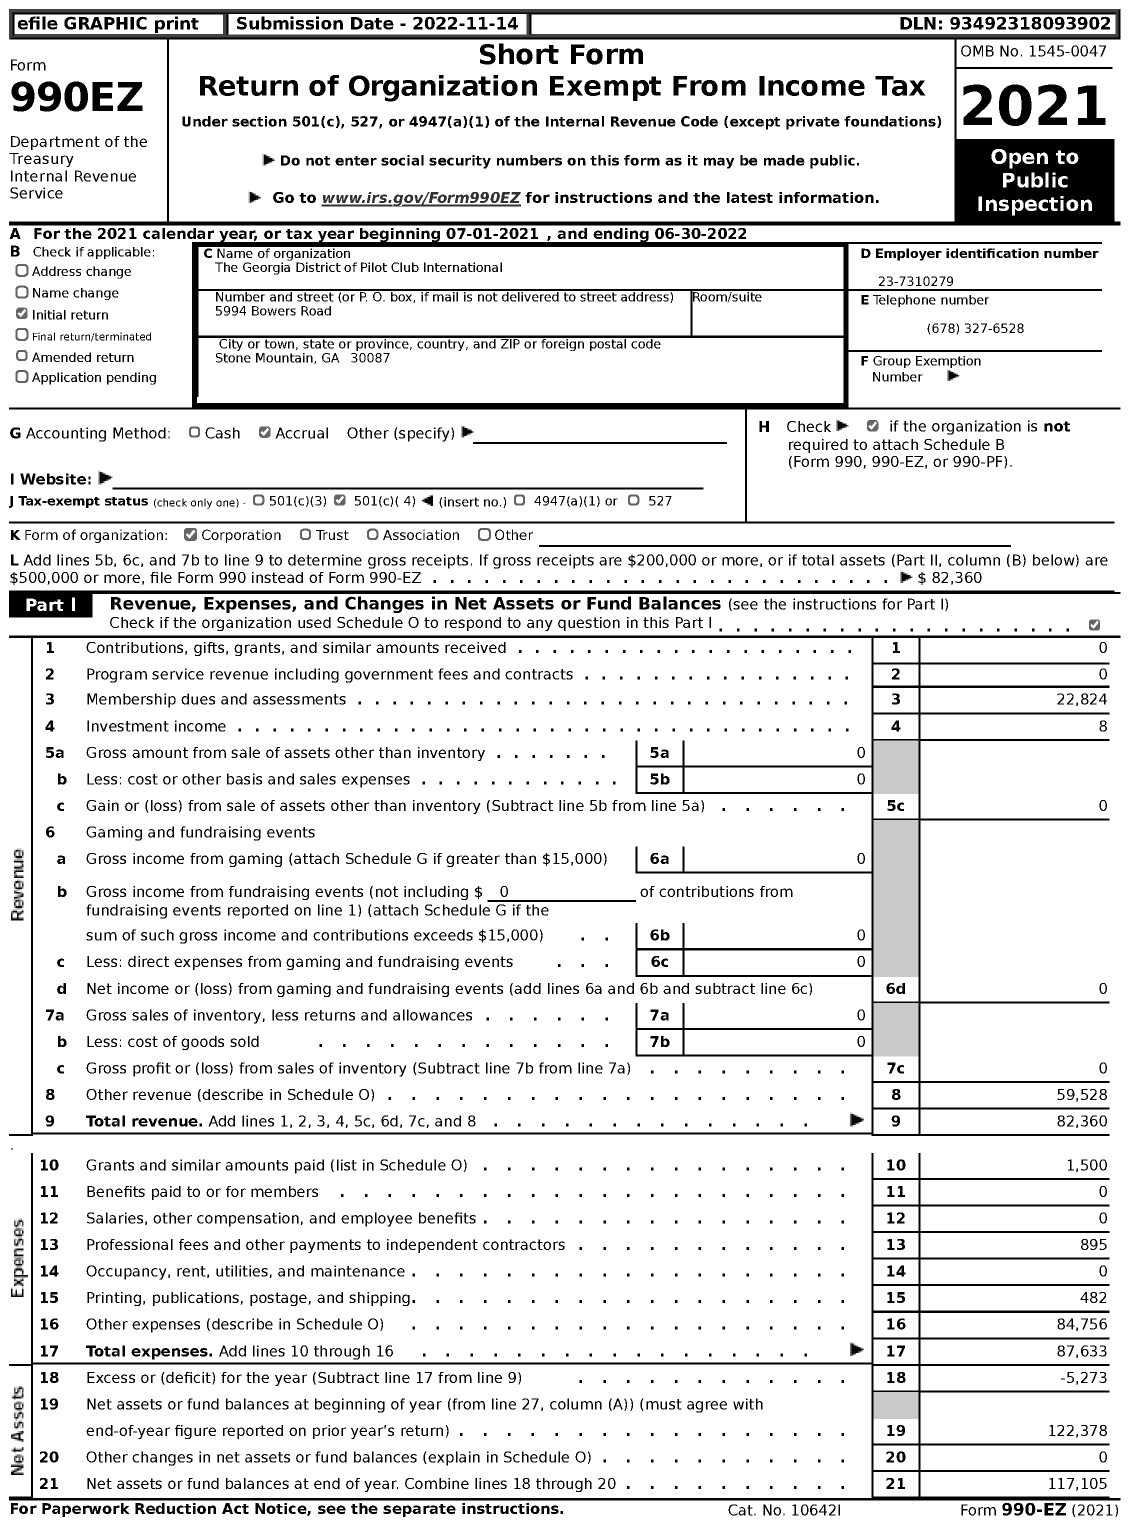 Image of first page of 2021 Form 990EZ for The Georgia District of Pilot Club International